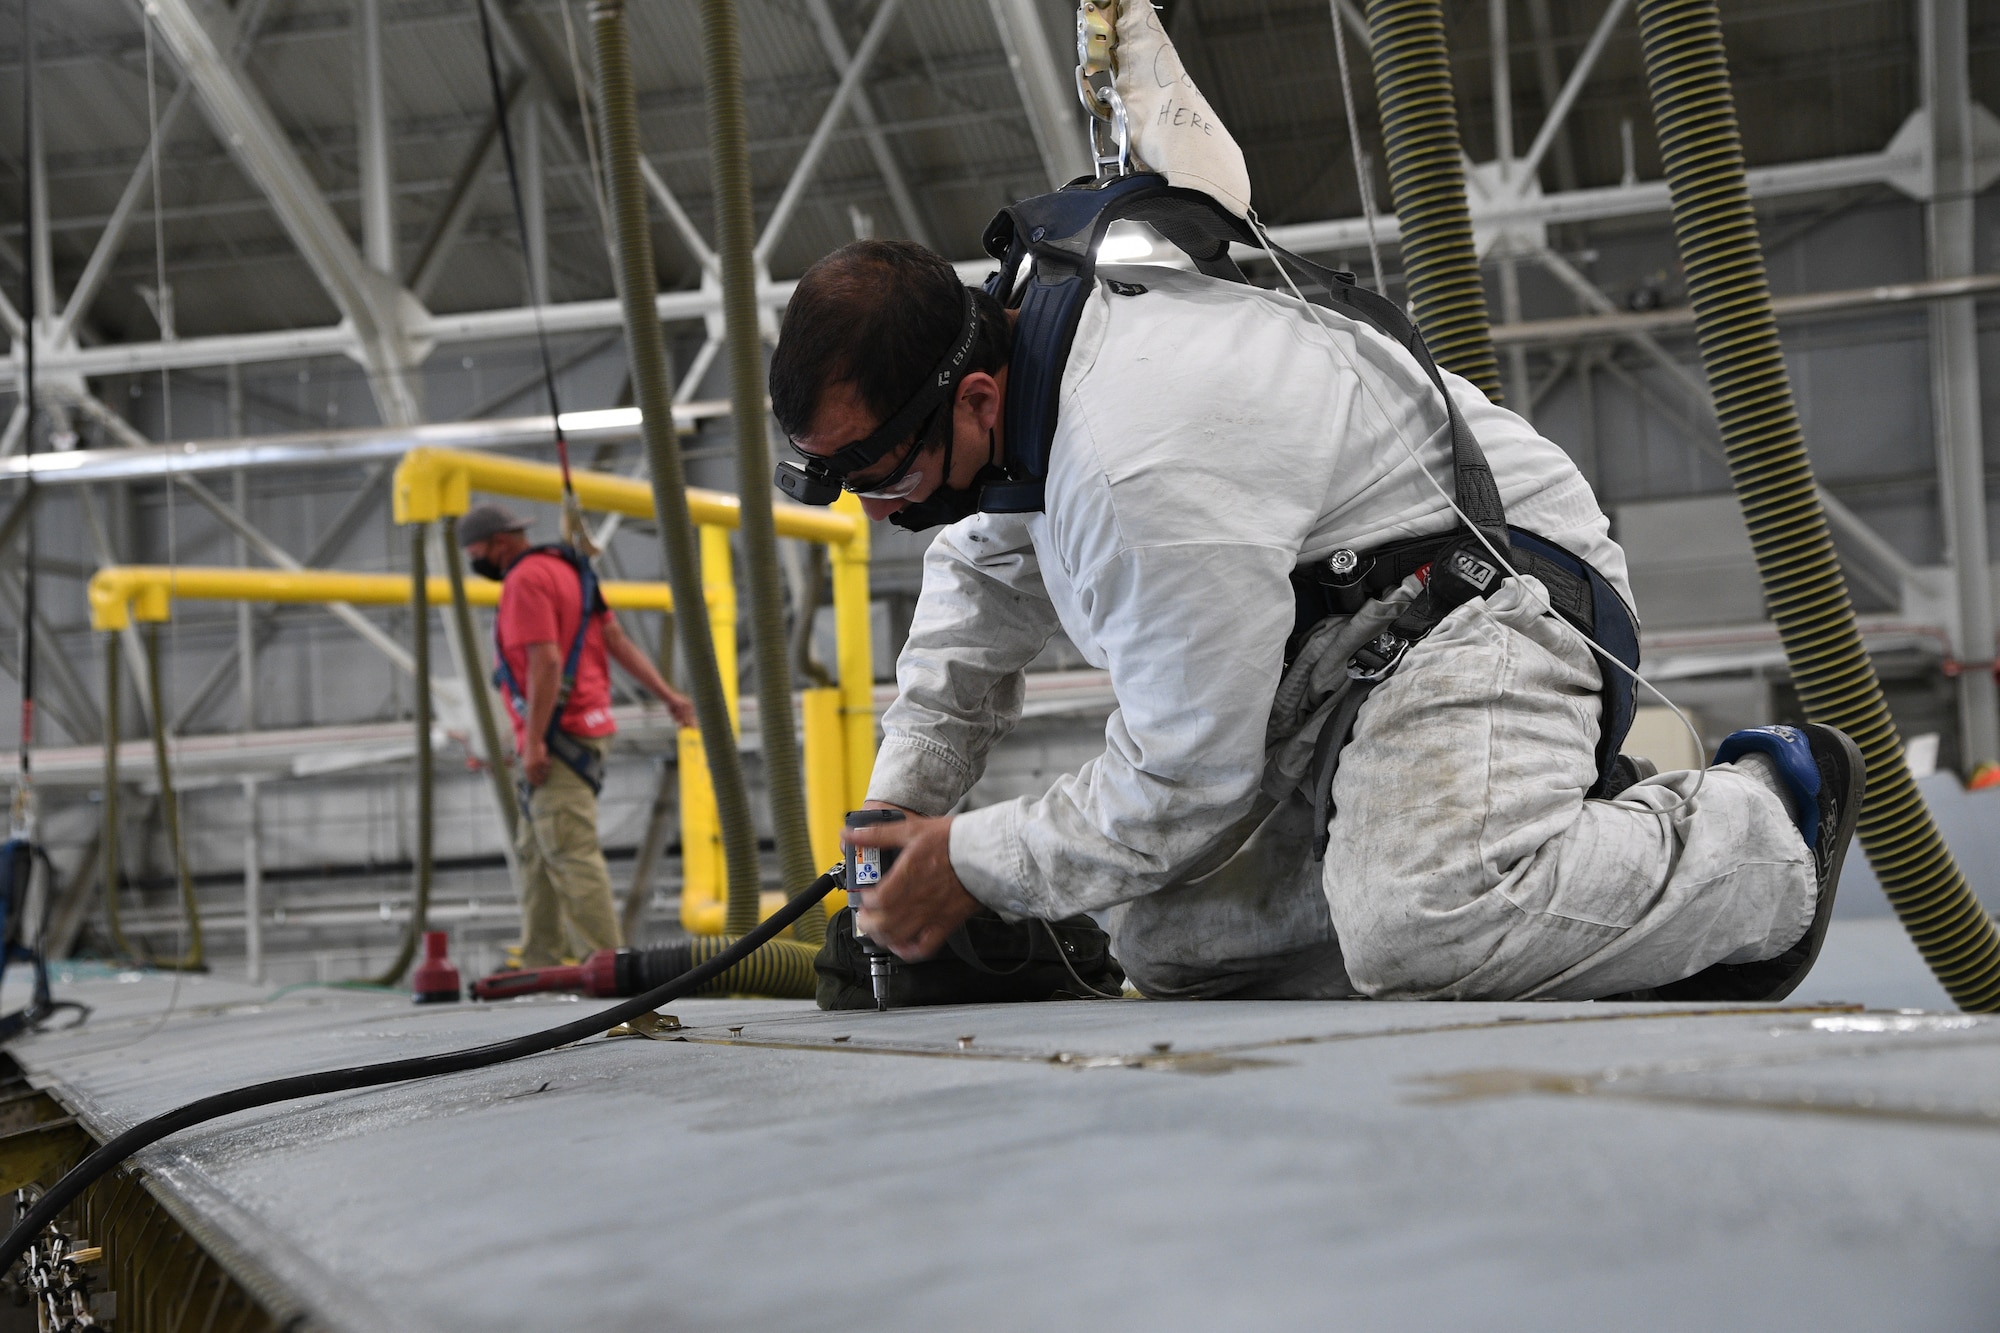 Jon Pena, 309th Aircraft Maintenance Group pneudraulic systems mechanic, removes a panel from a C-130 wing at Hill Air Force Base, Utah, May 8, 2020. Comprised of seven maintenance squadrons and more than 2,000 personnel, the 309th AMXG performs depot maintenance, repair and overhaul on A-10, C-130, F-16, F-22, F-35 and T-38 airframes. (U.S. Air Force photo by R. Nial Bradshaw)